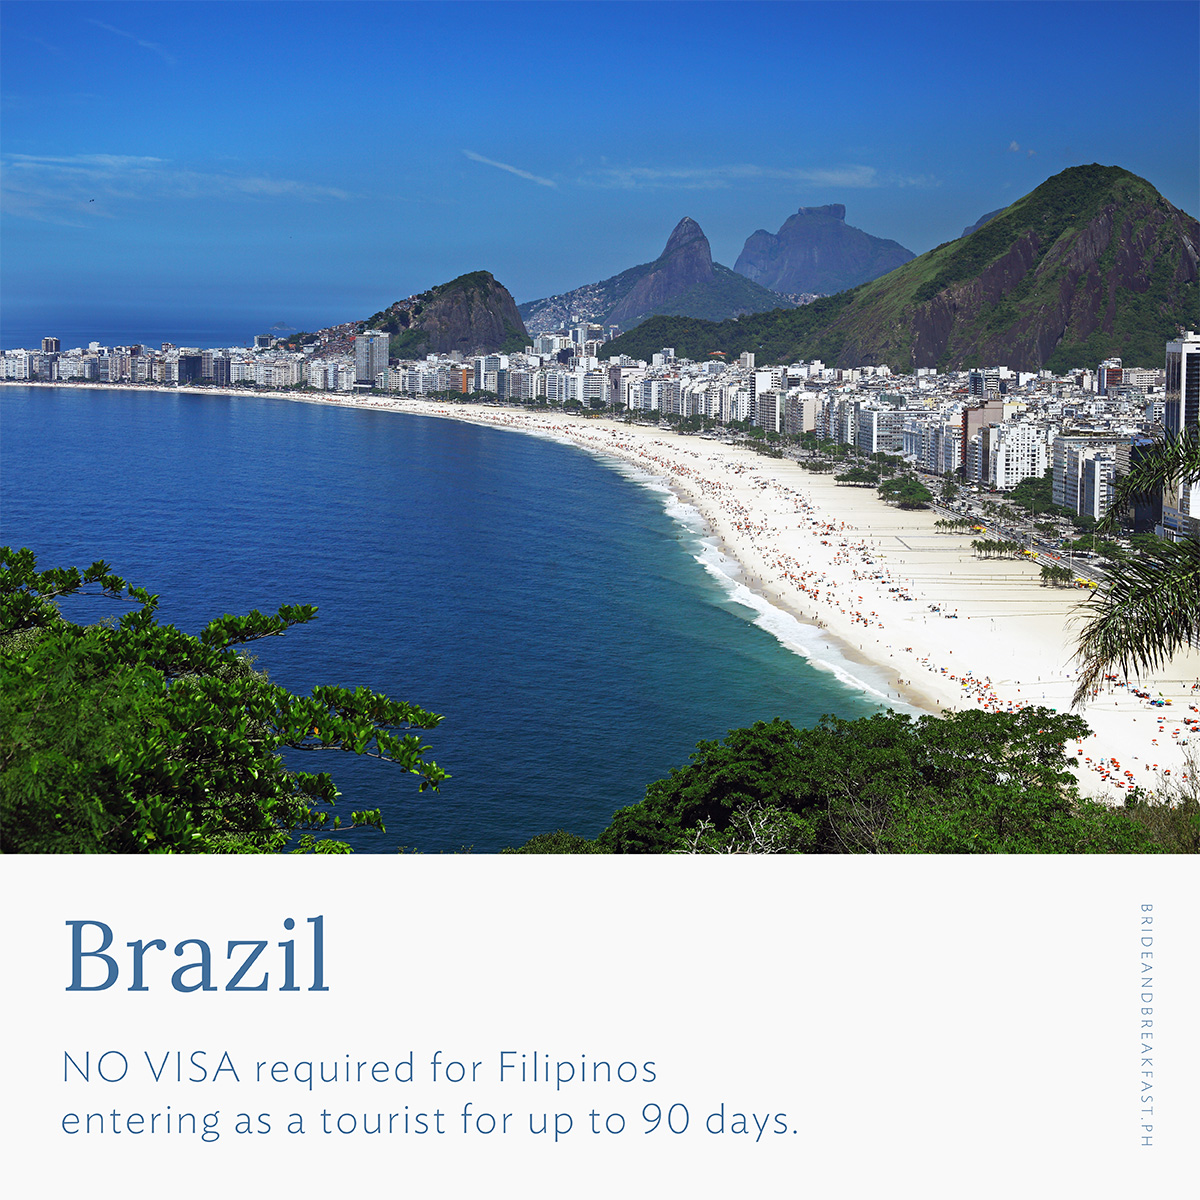 BRAZIL Visa Requirement: NO VISA required for Filipinos entering as a tourist for up to 90 days.